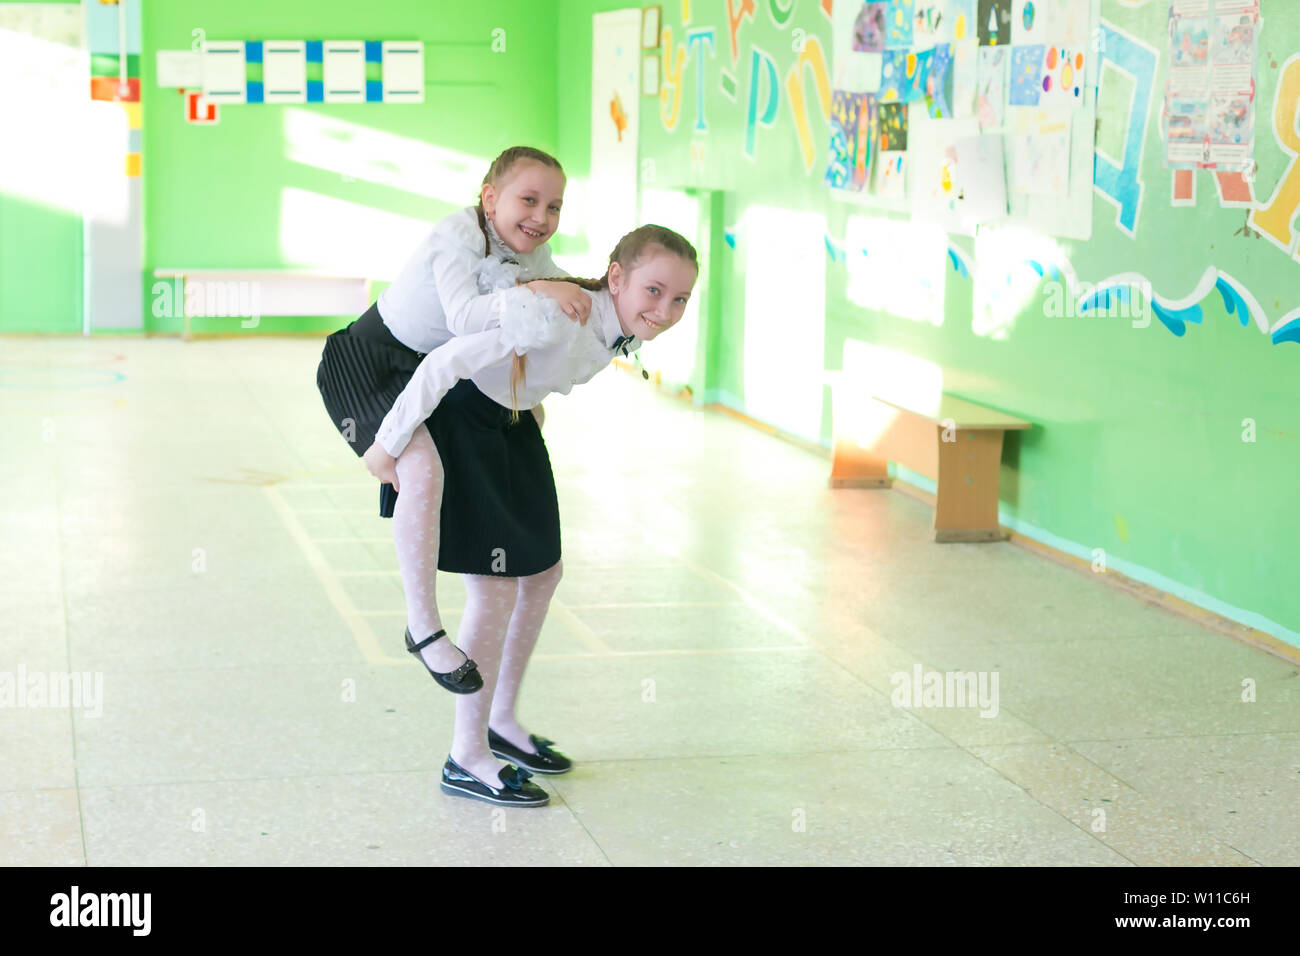 School friends at recess. A tall girl rolls her friend in her lap. Stock Photo